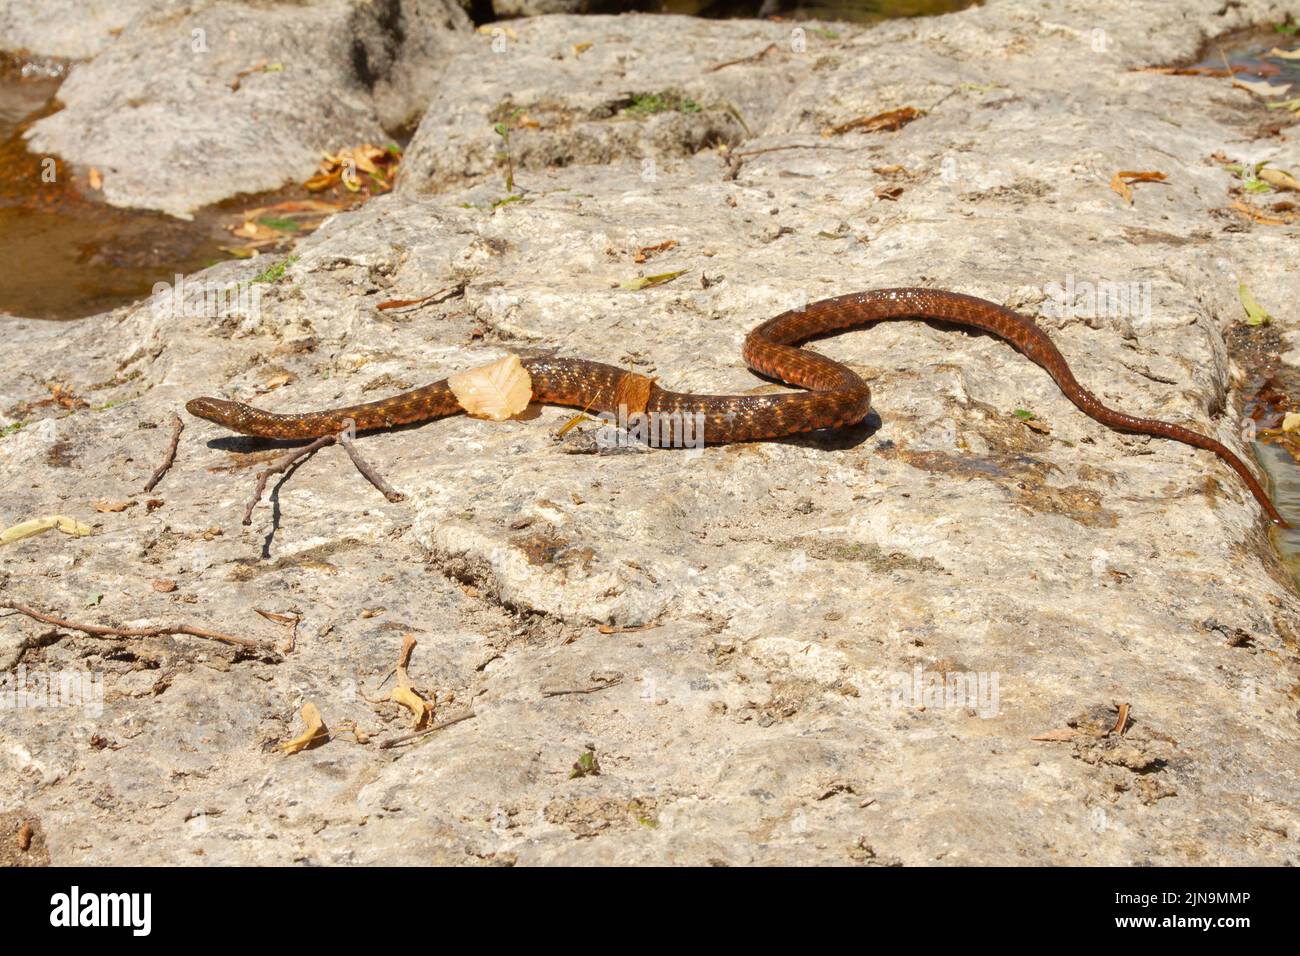 A dice snake crawling on the rock Stock Photo